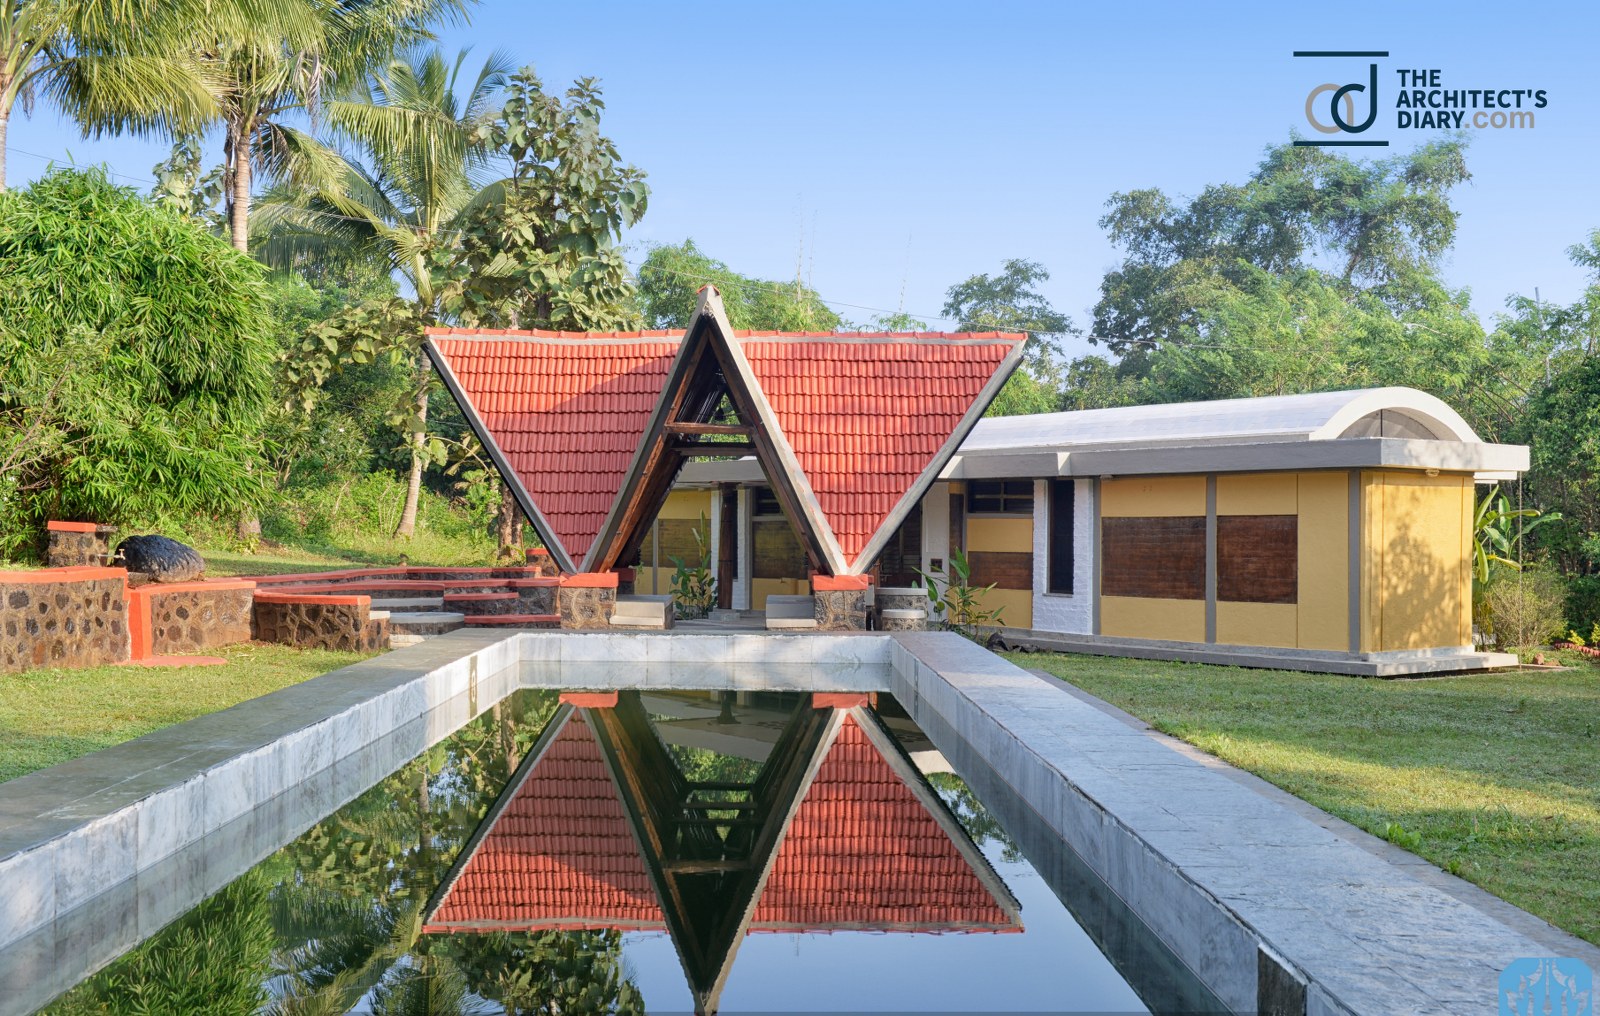 Farm House In Mumbai Responds To Its Context And Ecology | The ...